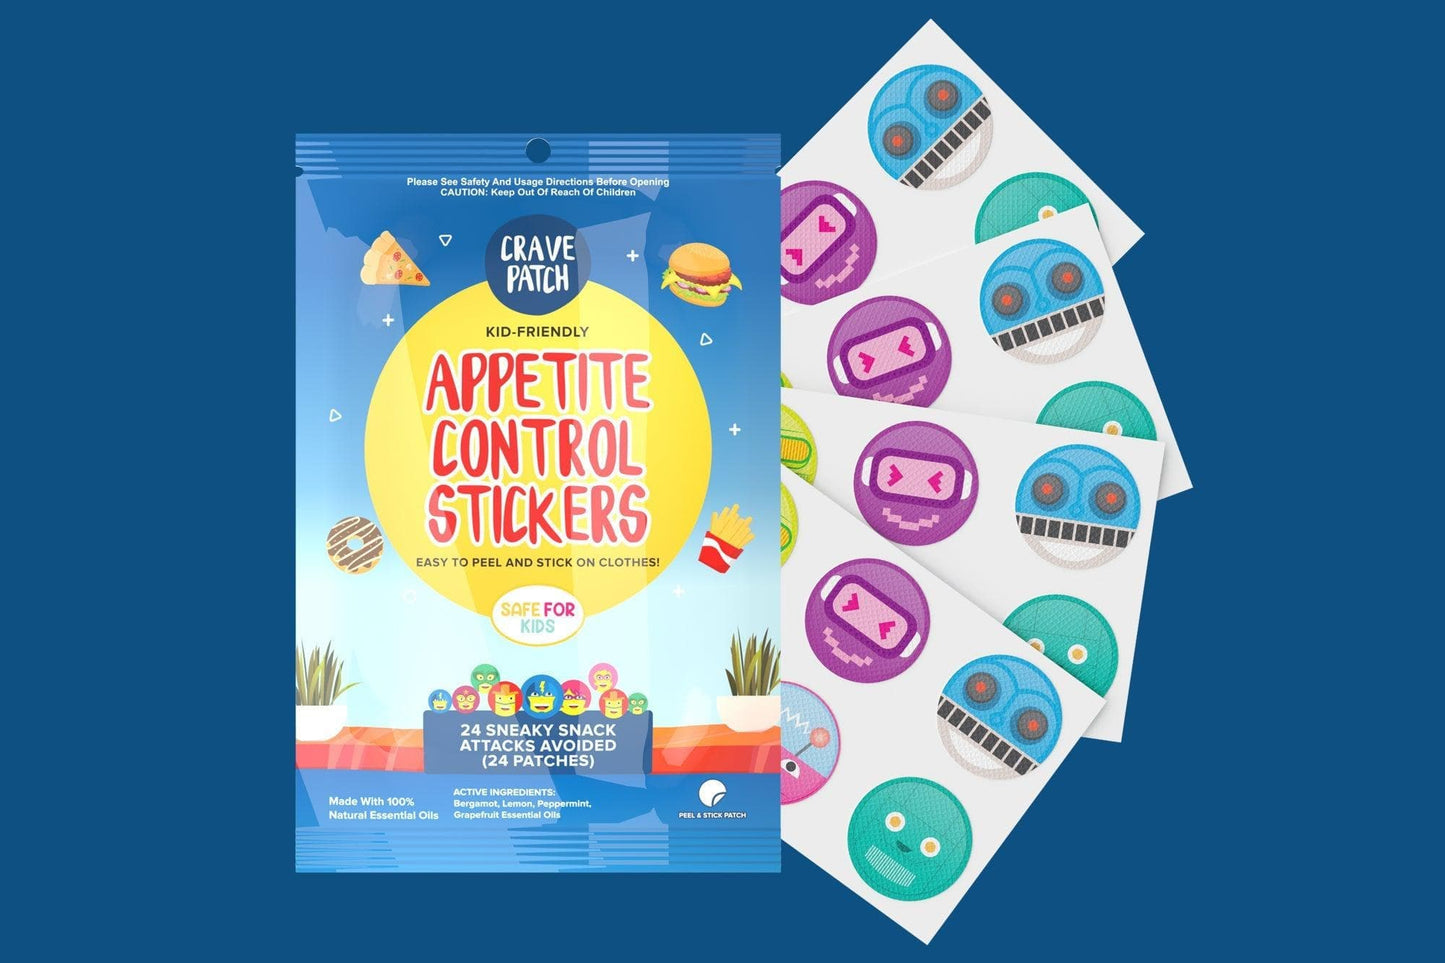 30 x CravePatch Appetite Control Stickers individual resale packets in a Retail Display Box - AU